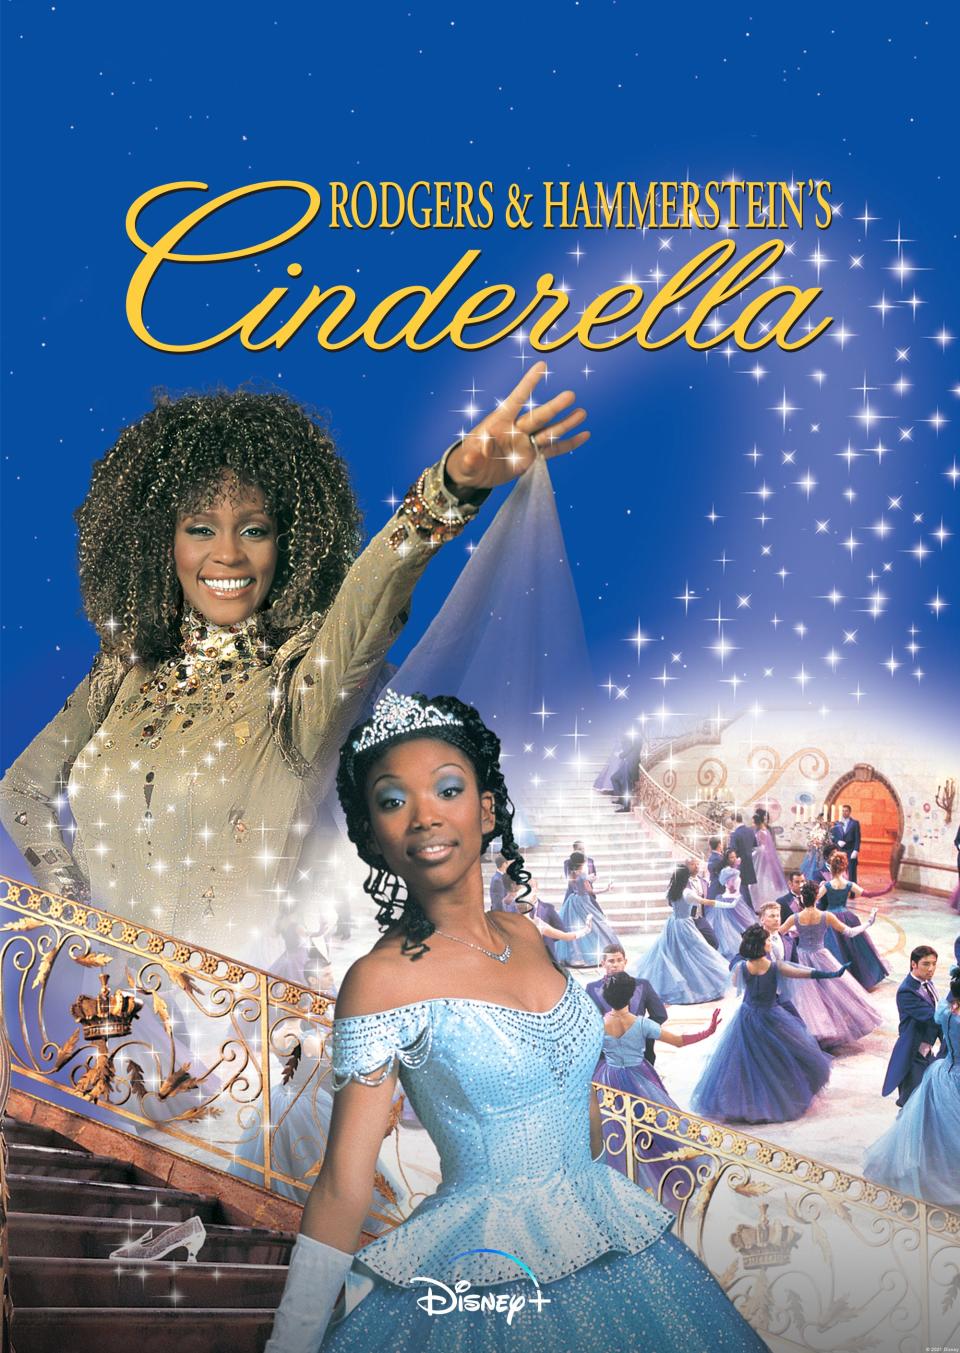 "Rodgers and Hammerstein's Cinderella," which starred singers Brandy Norwood and Whitney Houston, premiered on television screens in November 1997. Brandy revisited the musical fantasy in a TV special Tuesday, which marked the film's upcoming 25th anniversary.